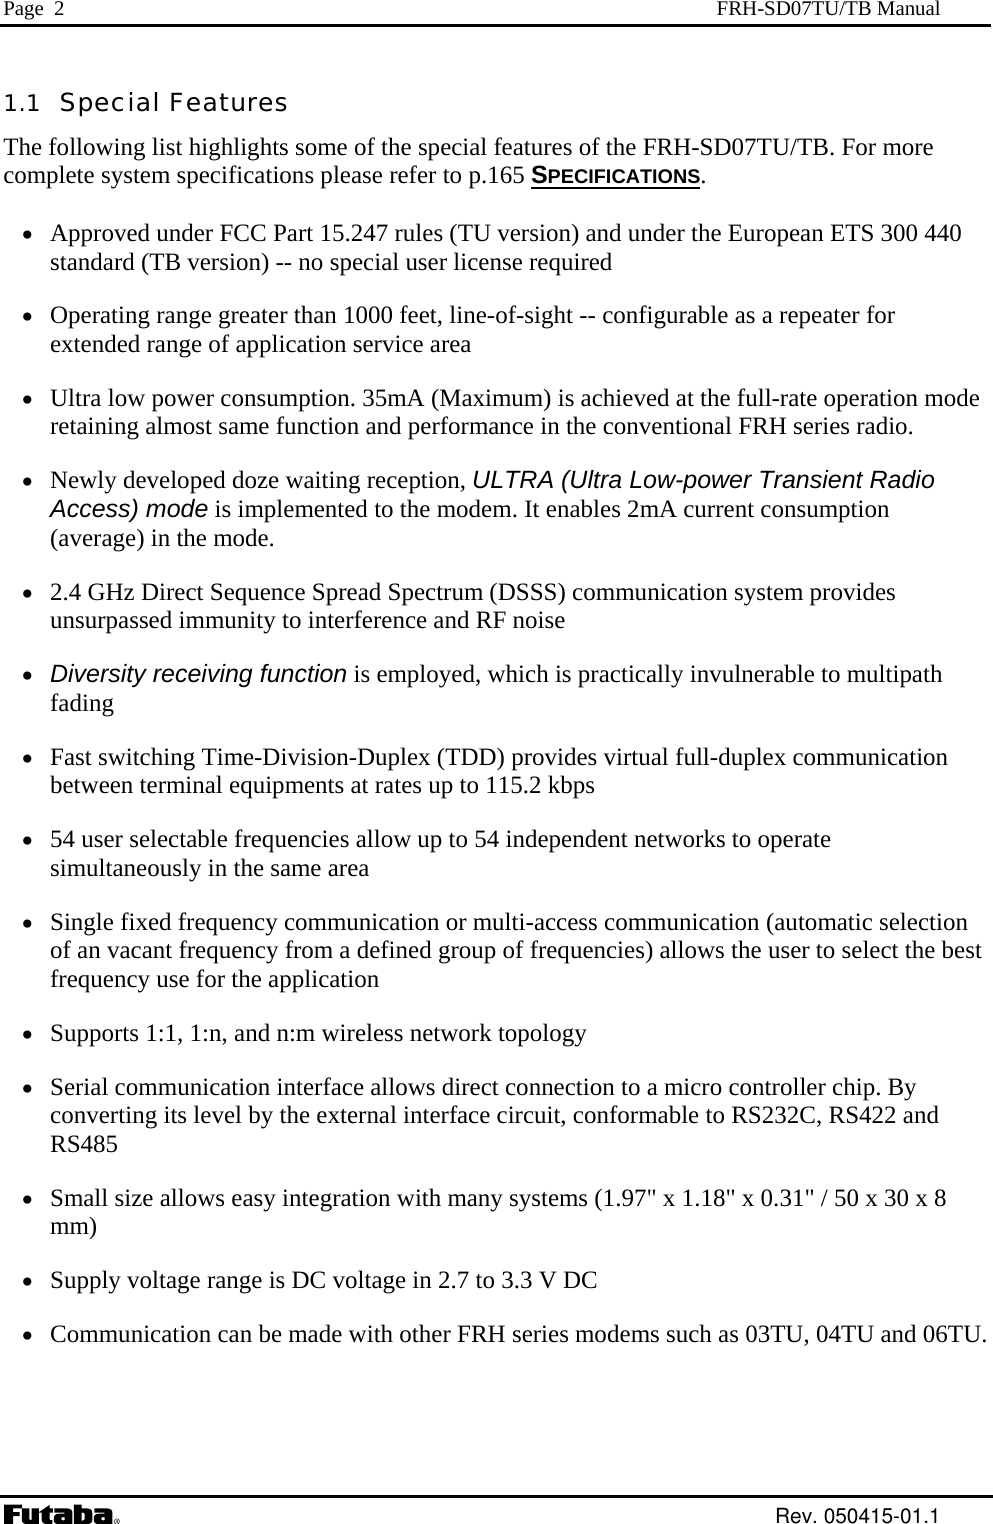 Page  2  FRH-SD07TU/TB Manual 1.1  Special Features The following list highlights some of the special features of the FRH-SD07TU/TB. For more complete system specifications please refer to p.165 SPECIFICATIONS.  •  Approved under FCC Part 15.247 rules (TU version) and under the European ETS 300 440 standard (TB version) -- no special user license required •  Operating range greater than 1000 feet, line-of-sight -- configurable as a repeater for extended range of application service area •  Ultra low power consumption. 35mA (Maximum) is achieved at the full-rate operation mode retaining almost same function and performance in the conventional FRH series radio. •  Newly developed doze waiting reception, ULTRA (Ultra Low-power Transient Radio Access) mode is implemented to the modem. It enables 2mA current consumption (average) in the mode. •  2.4 GHz Direct Sequence Spread Spectrum (DSSS) communication system provides unsurpassed immunity to interference and RF noise •  Diversity receiving function is employed, which is practically invulnerable to multipath fading •  Fast switching Time-Division-Duplex (TDD) provides virtual full-duplex communication between terminal equipments at rates up to 115.2 kbps •  54 user selectable frequencies allow up to 54 independent networks to operate simultaneously in the same area •  Single fixed frequency communication or multi-access communication (automatic selection of an vacant frequency from a defined group of frequencies) allows the user to select the best frequency use for the application •  Supports 1:1, 1:n, and n:m wireless network topology •  Serial communication interface allows direct connection to a micro controller chip. By converting its level by the external interface circuit, conformable to RS232C, RS422 and RS485 •  Small size allows easy integration with many systems (1.97&quot; x 1.18&quot; x 0.31&quot; / 50 x 30 x 8 mm)                       •  Supply voltage range is DC voltage in 2.7 to 3.3 V DC •  Communication can be made with other FRH series modems such as 03TU, 04TU and 06TU.  Rev. 050415-01.1 